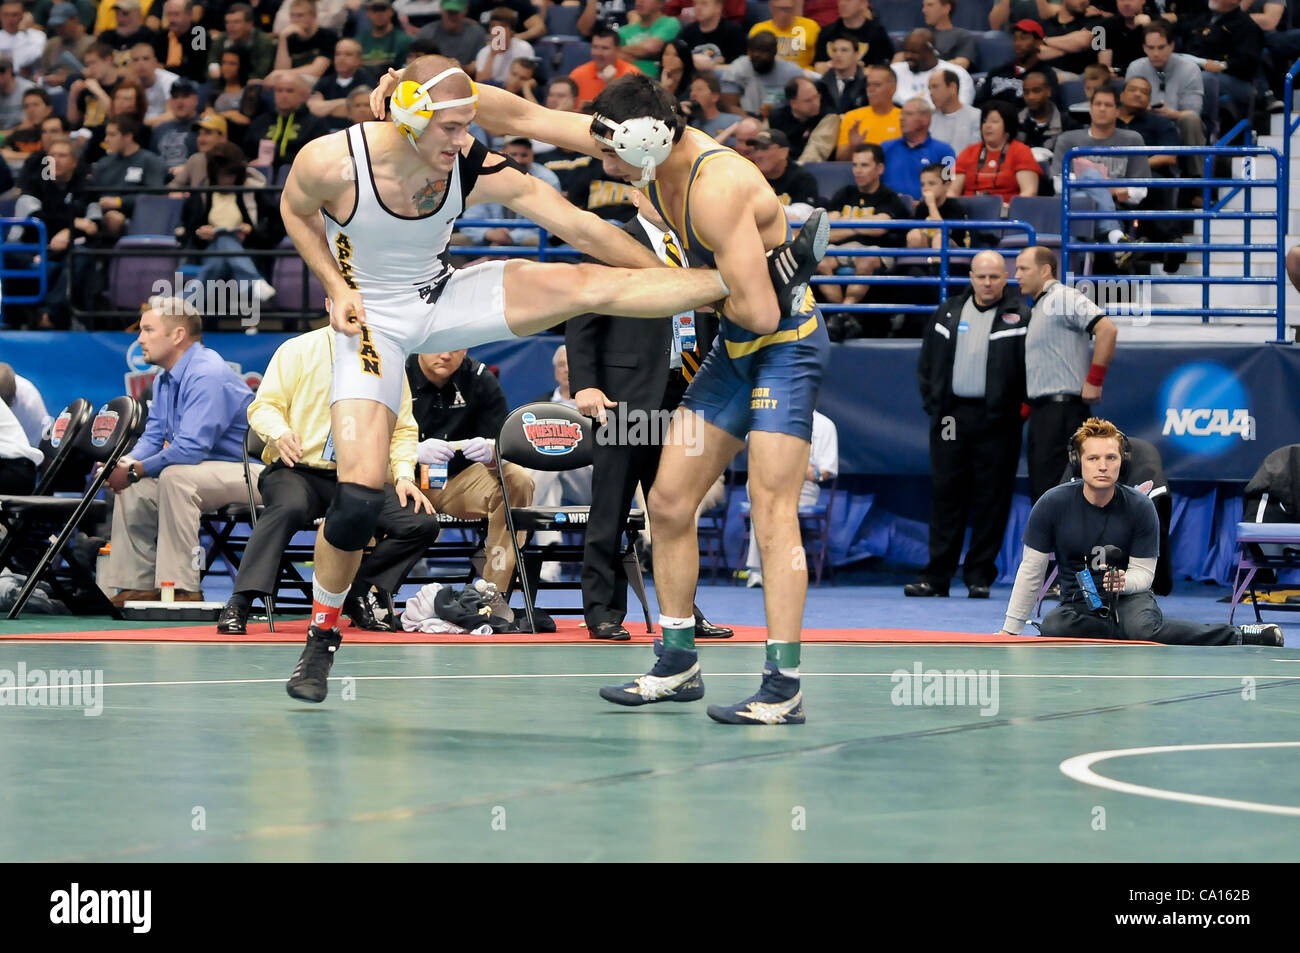 March 17, 2012 - St. Louis, Missouri, United States of America - Bekzod Abdurakhmonov (right) of Clarion uses a single leg brace to control his opponent Kyle Blevins (left) of Appalachian State during the 165 pound 3rd place championship match of the NCAA Division 1 Wrestling Championships in St. Lo Stock Photo